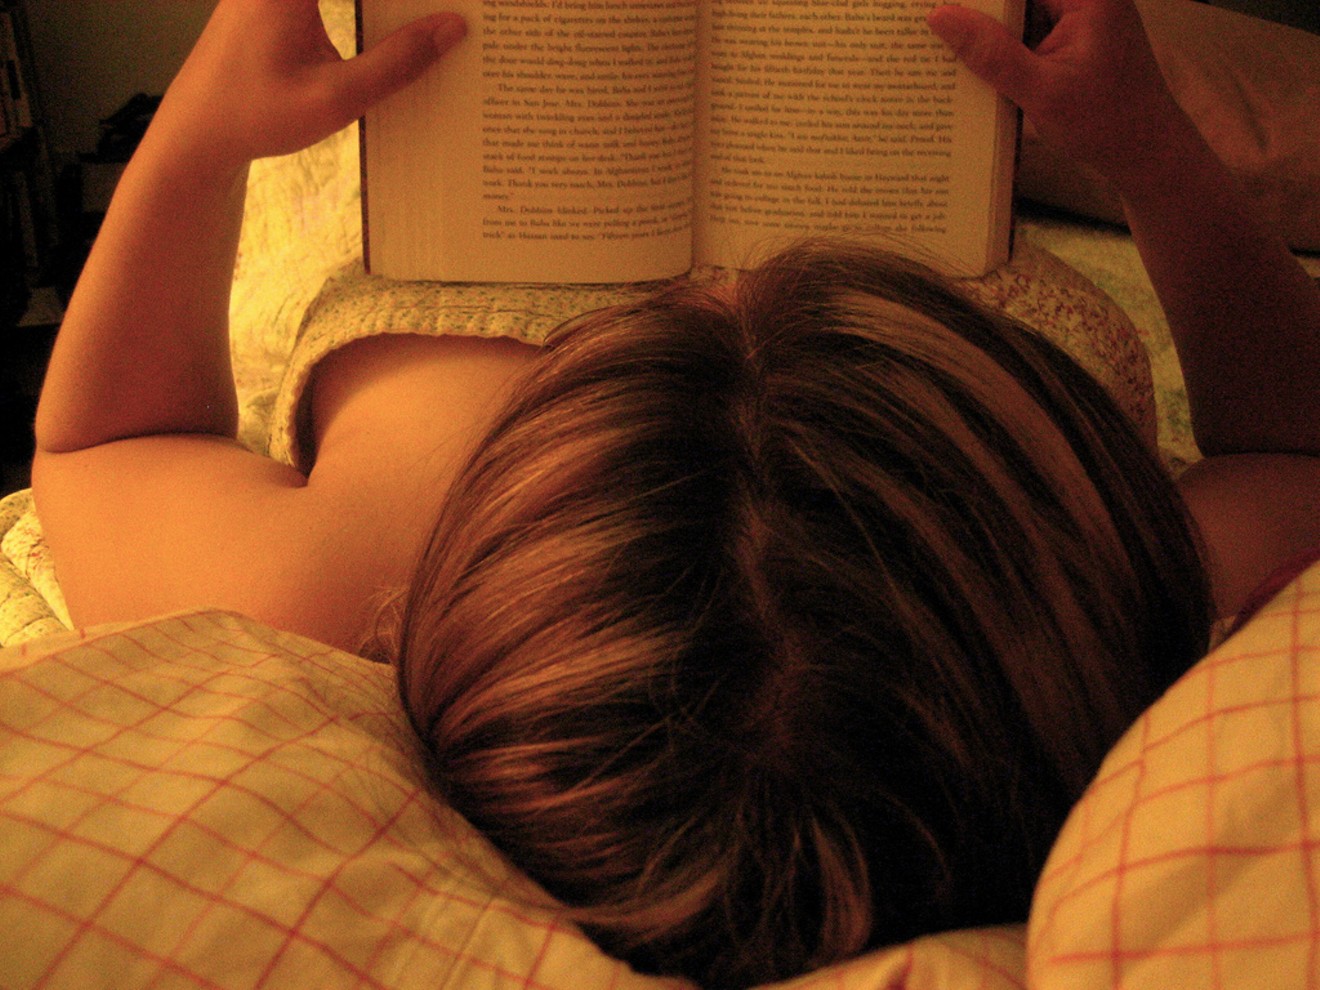 Or you could just stay in bed all week and catch up on your reading.